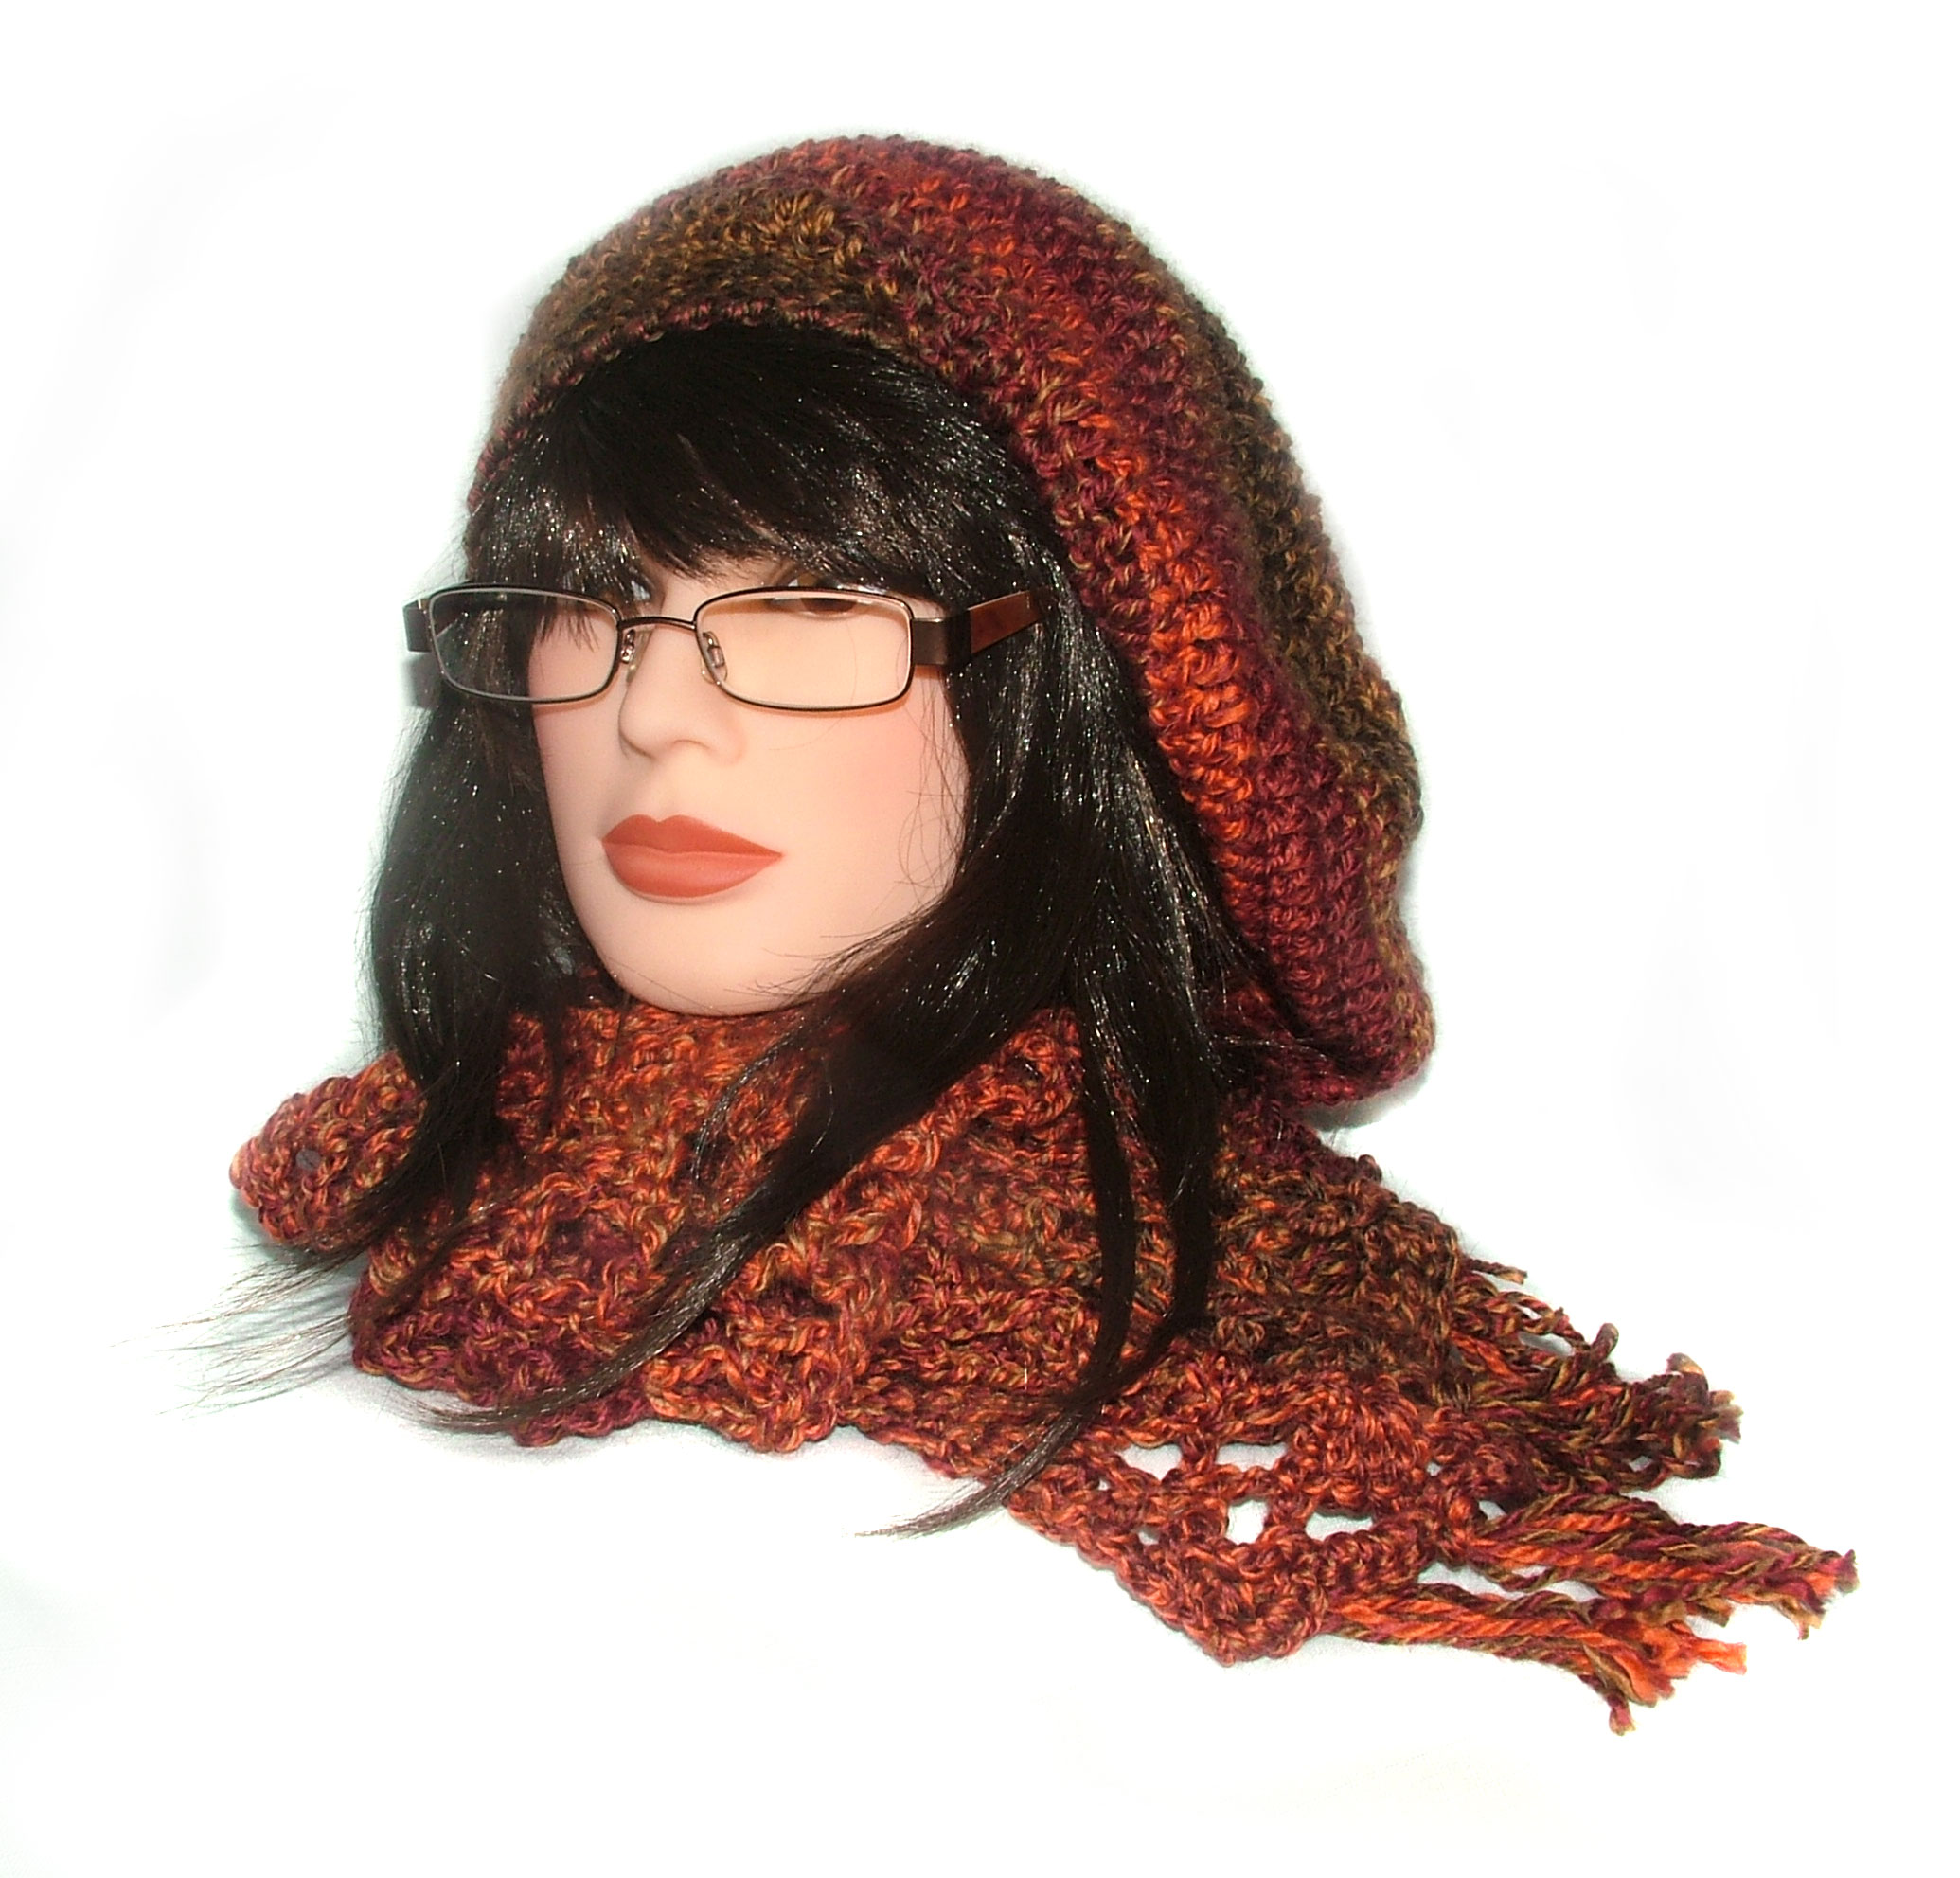 Knit rasta hat patterns in Women&apos;s Hats - Compare Prices, Read